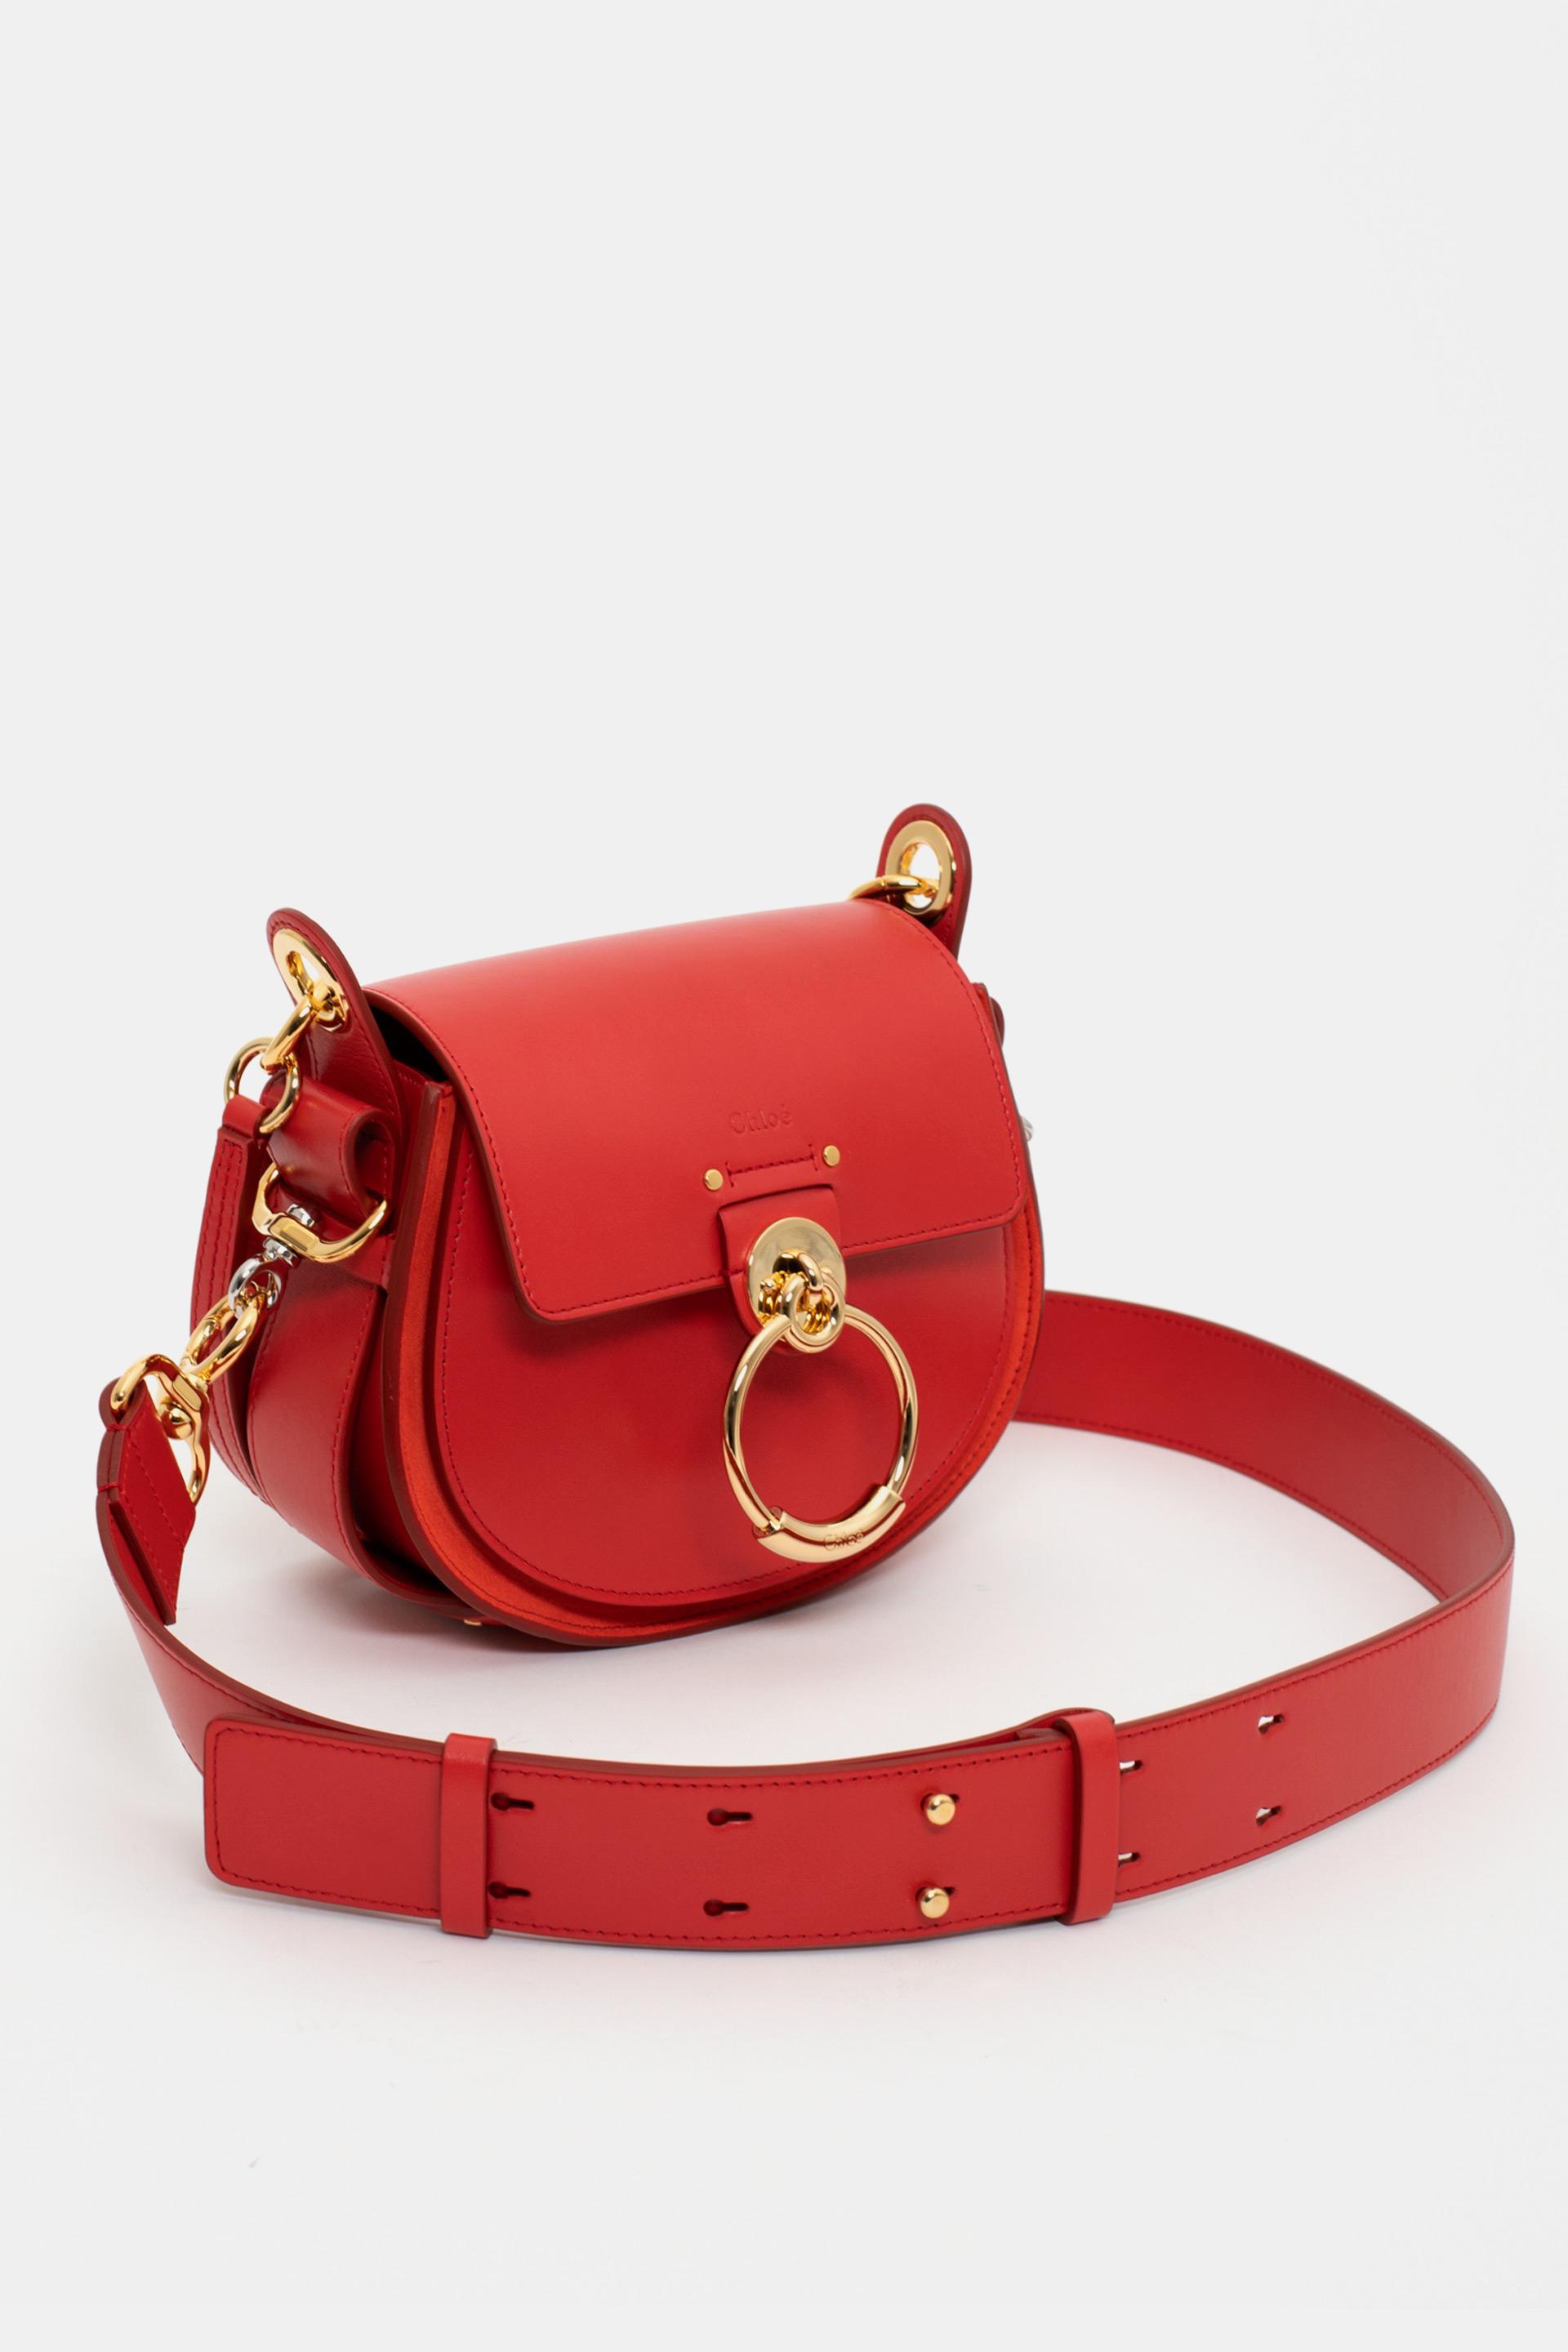 Chloé Small Tess Bag in Red - Lyst